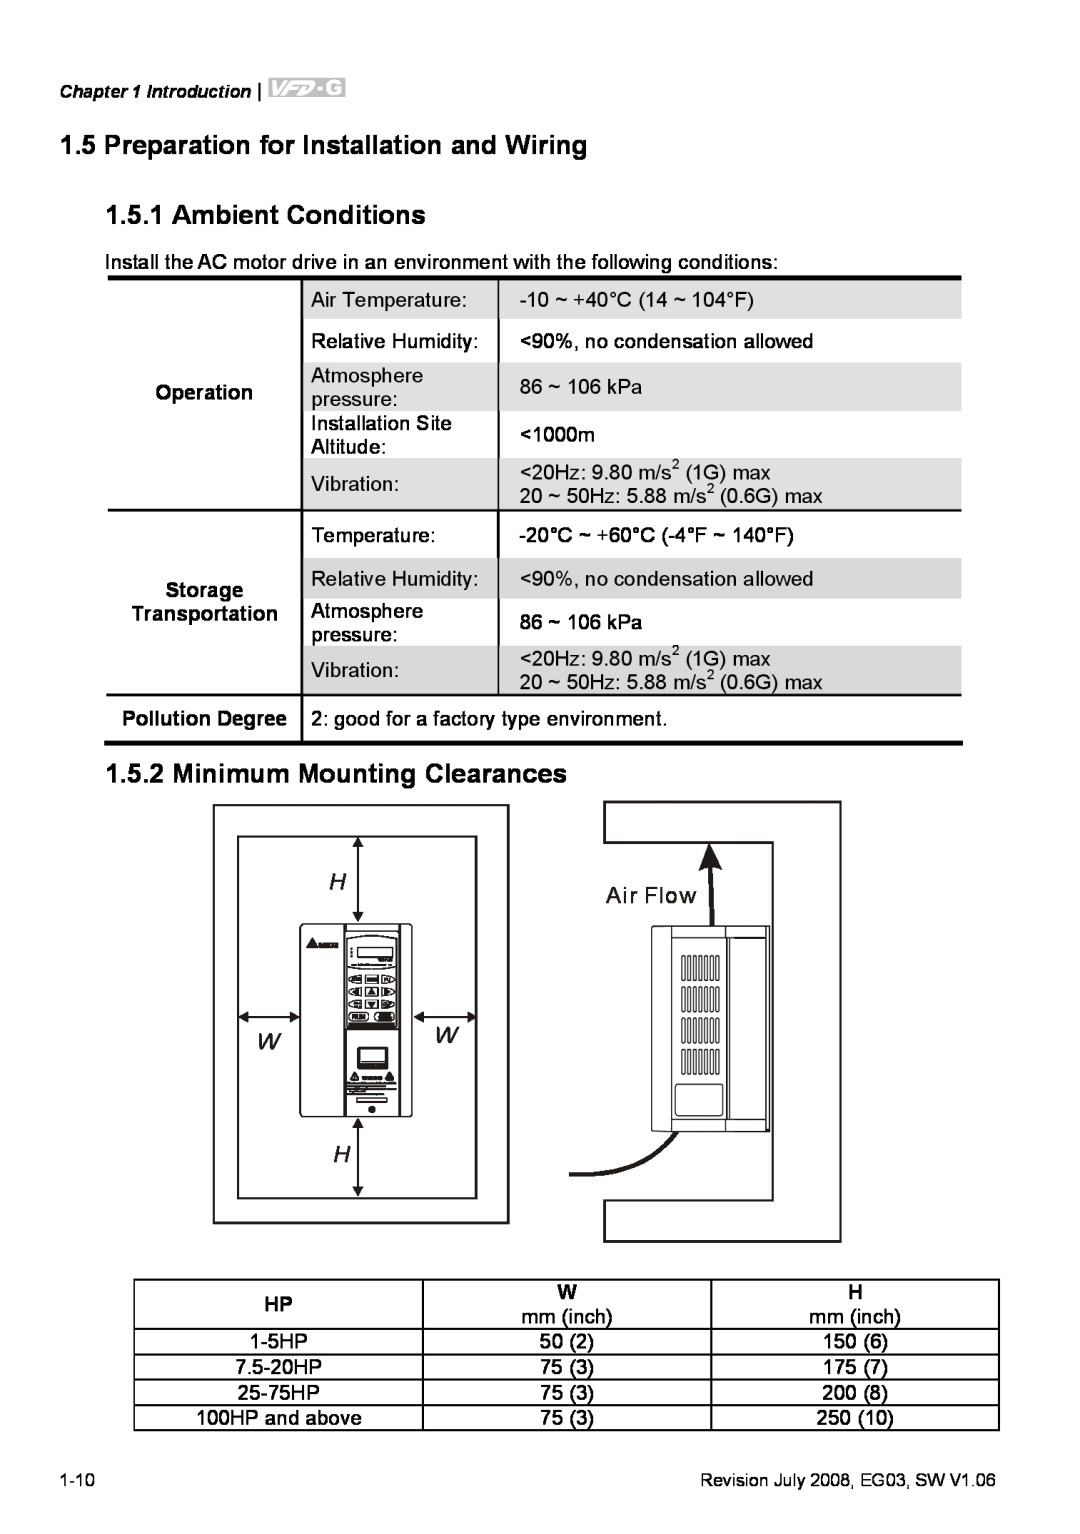 Delta Electronics VFD-G Preparation for Installation and Wiring 1.5.1 Ambient Conditions, Minimum Mounting Clearances 